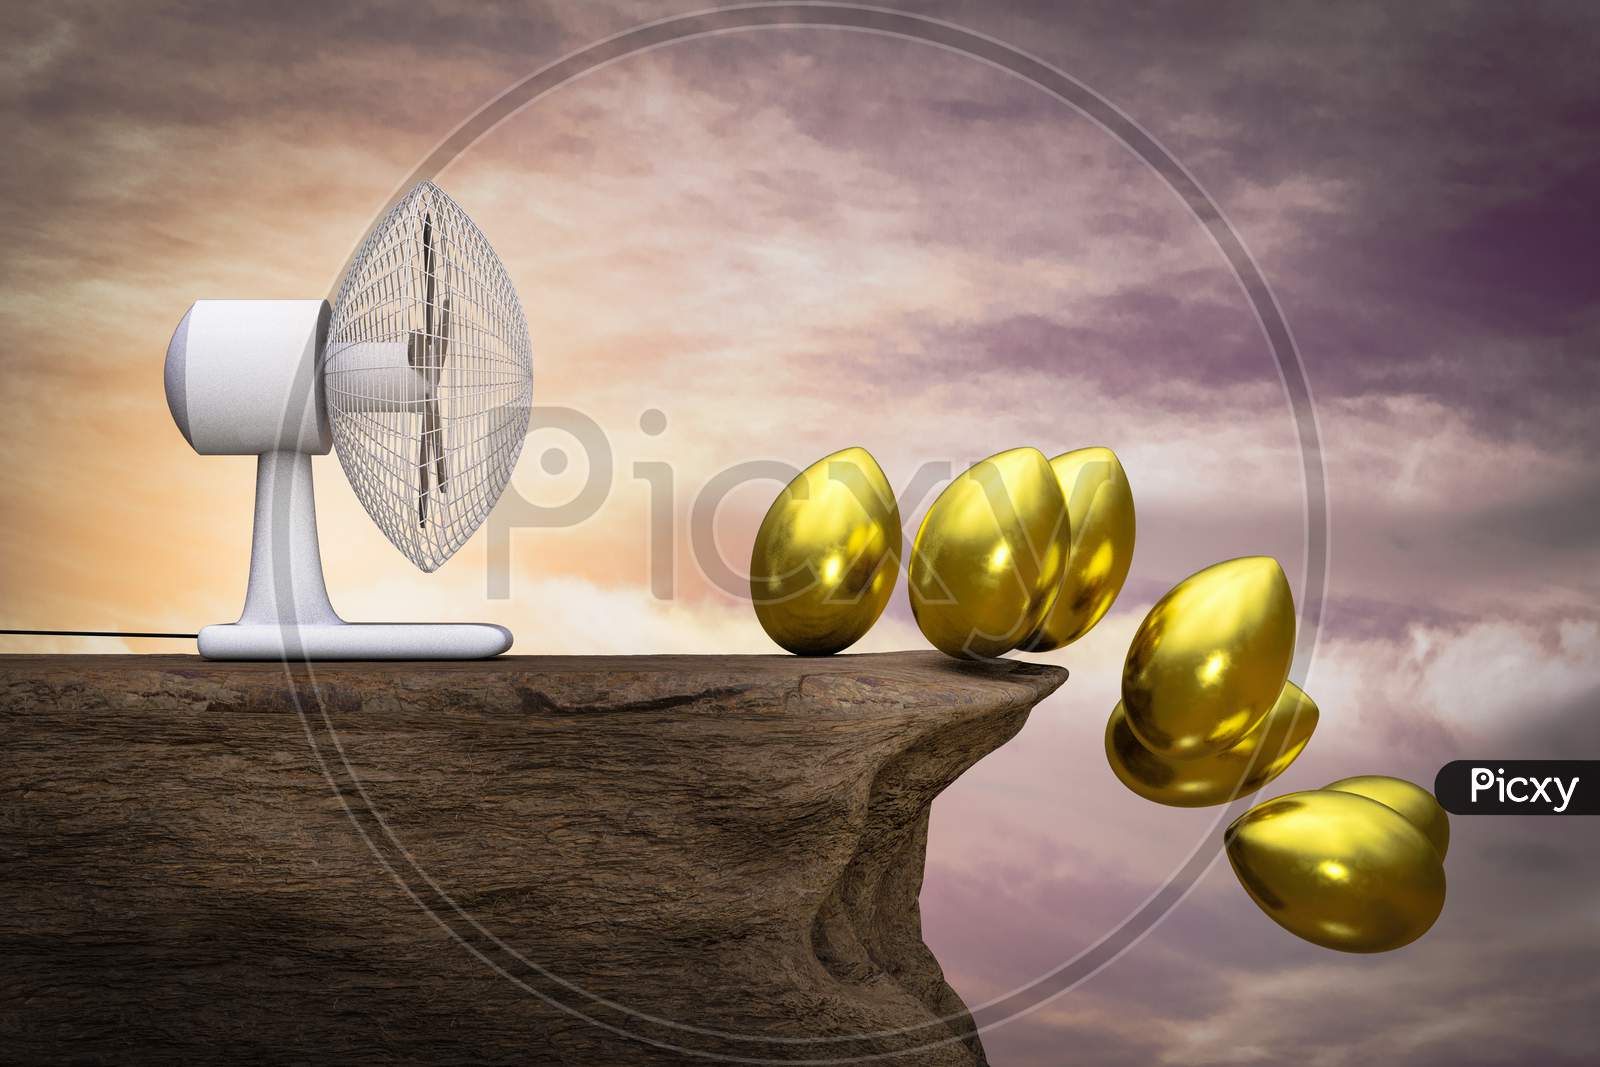 A Fan Blows Many Golden Eggs On Cliff At Sunset Magenta Day. Retirement Lost Concept. 3D Illustration